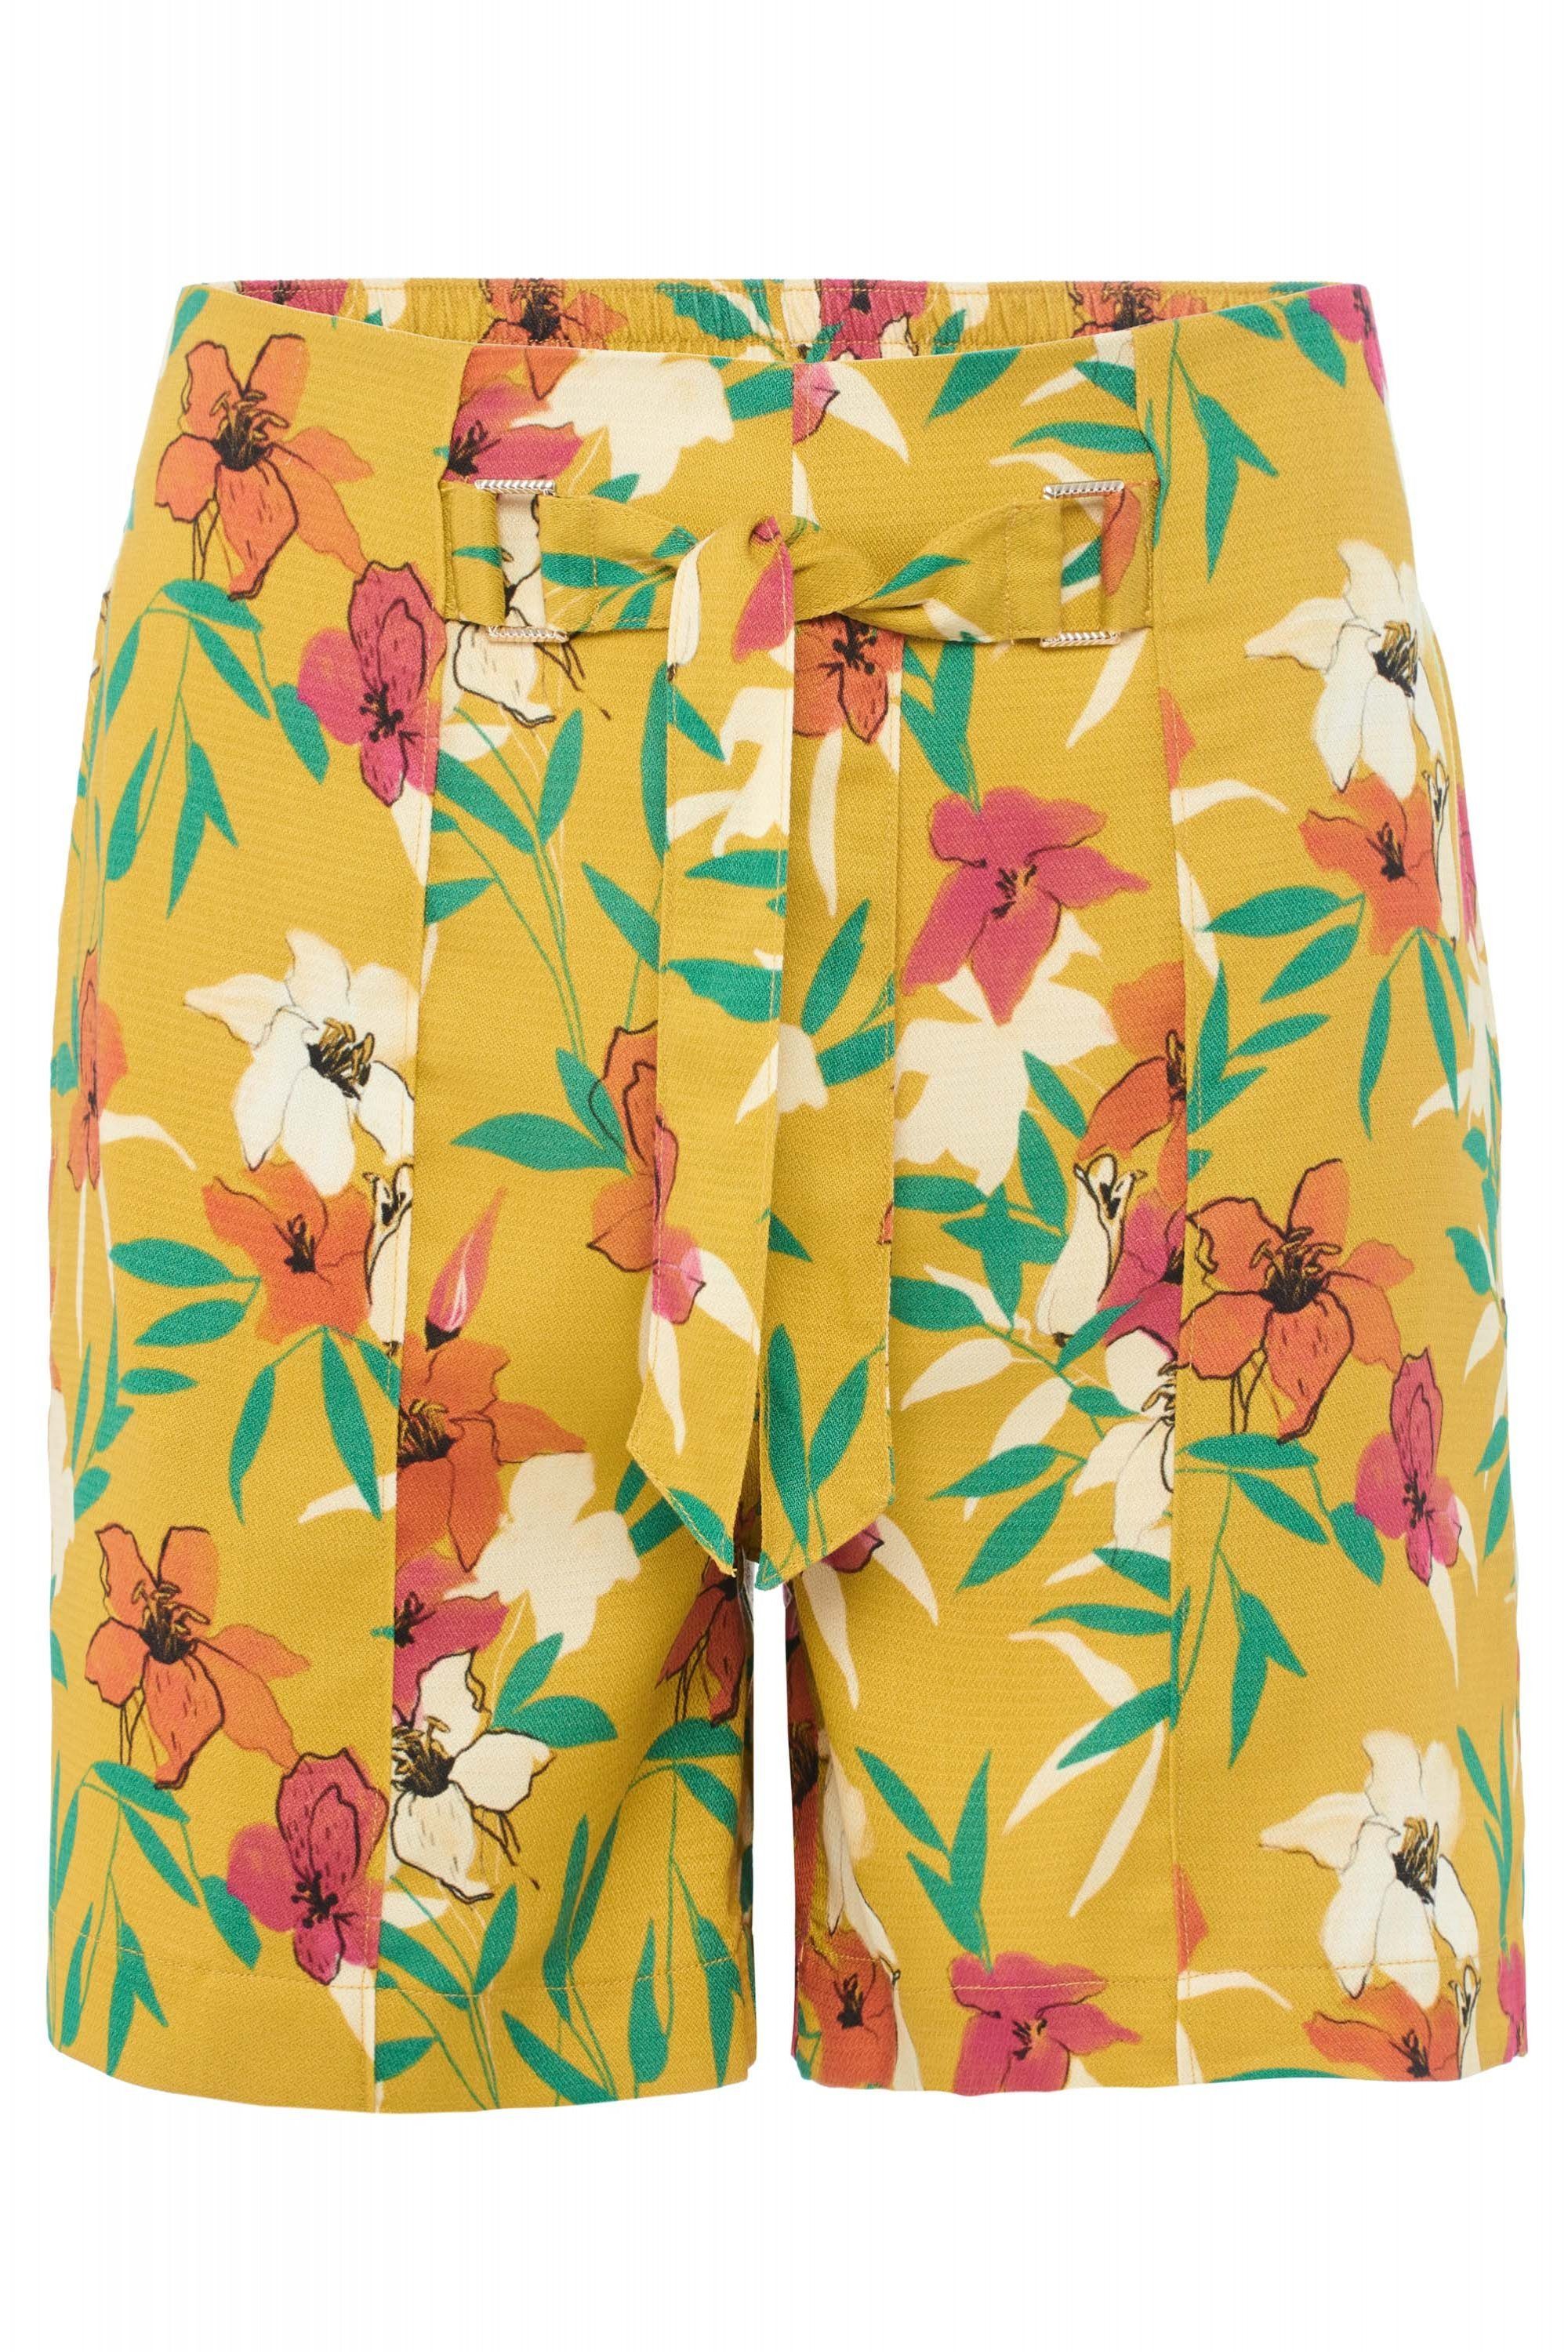 Salsa Stretch-Jeans SALSA JEANS SHORTS 122813.4048 print yellow floral